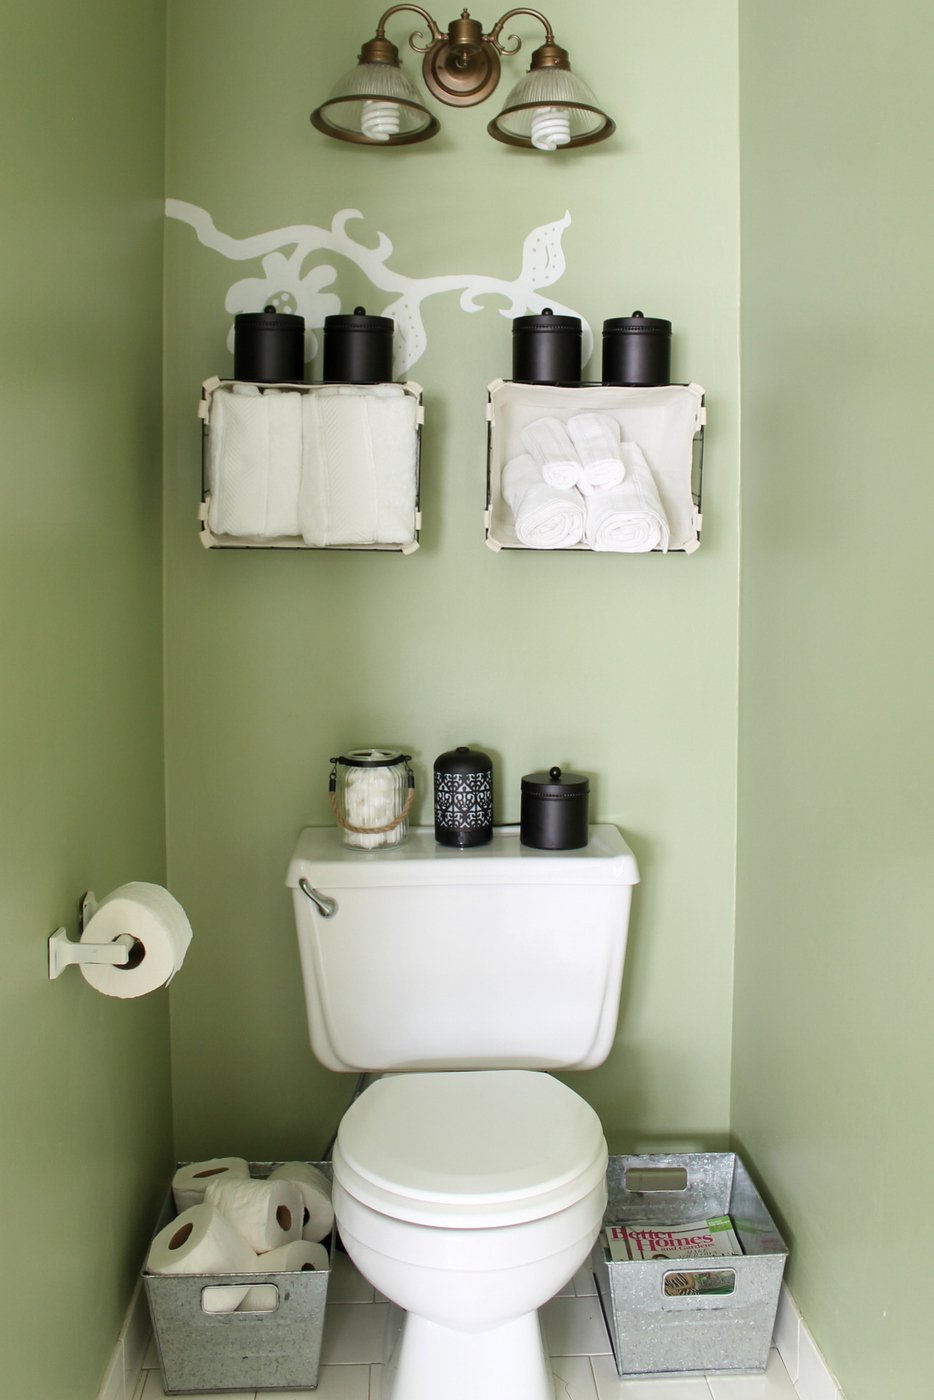 Small bathroom organization ideas that really work! Quick and easy ideas to organize your tiny bathroom in minutes!